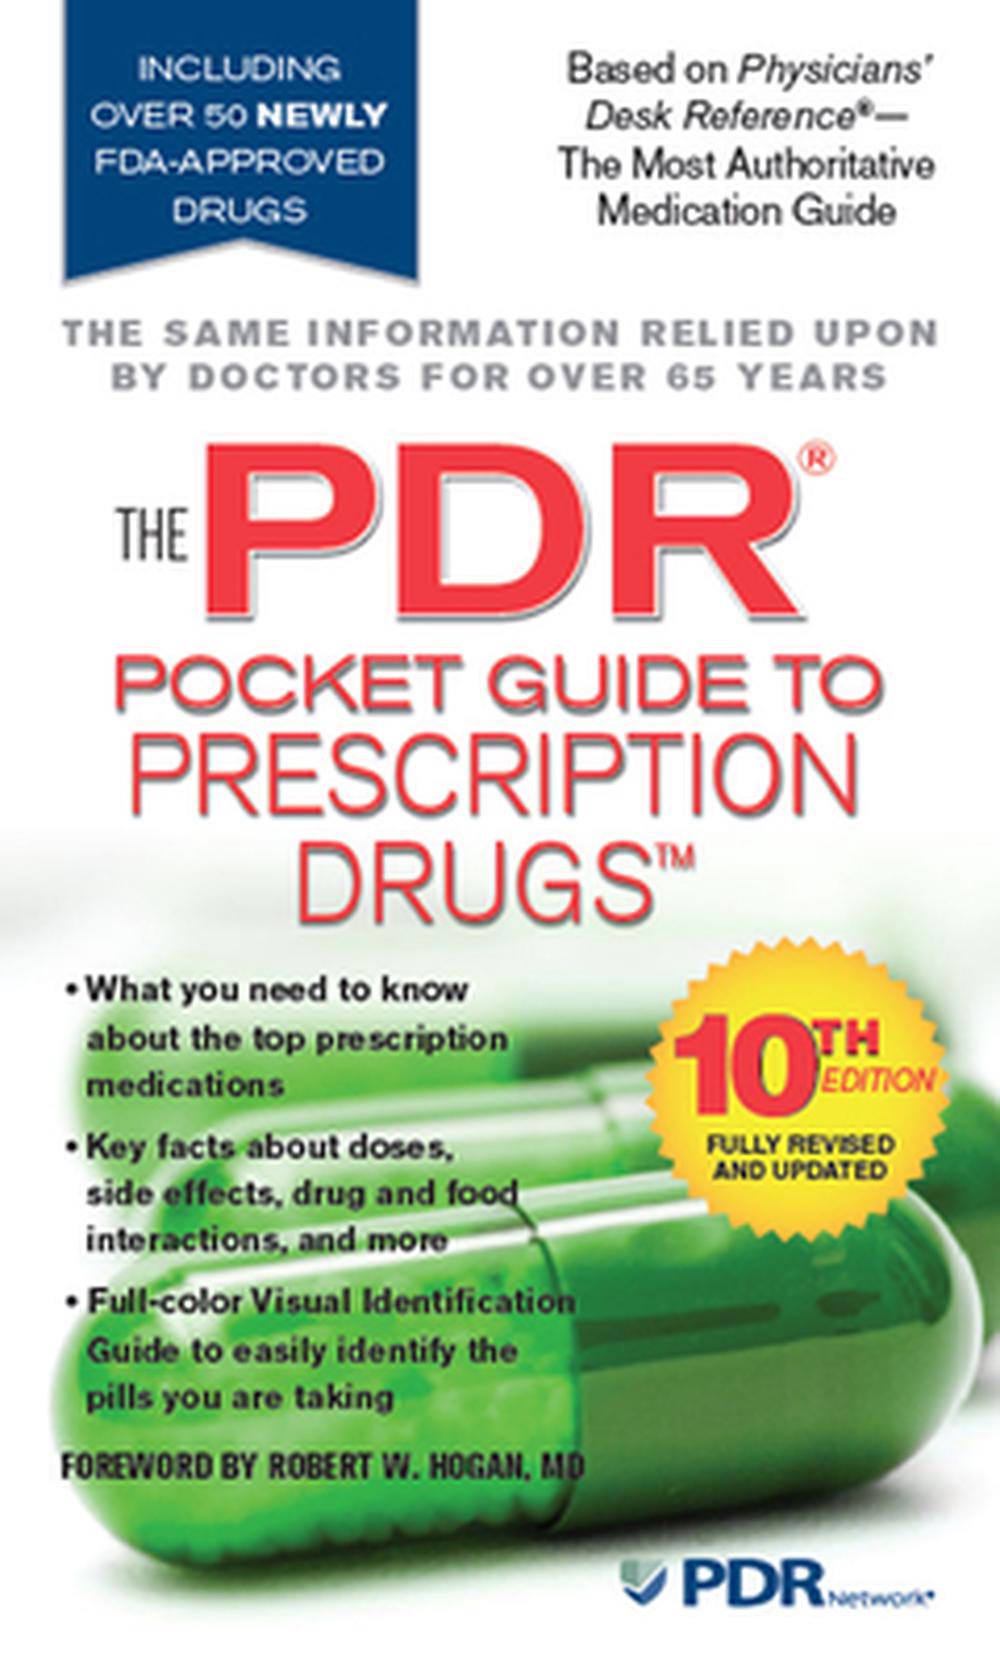 The Pdr Pocket Guide To Prescription Drugs By Physicians Desk